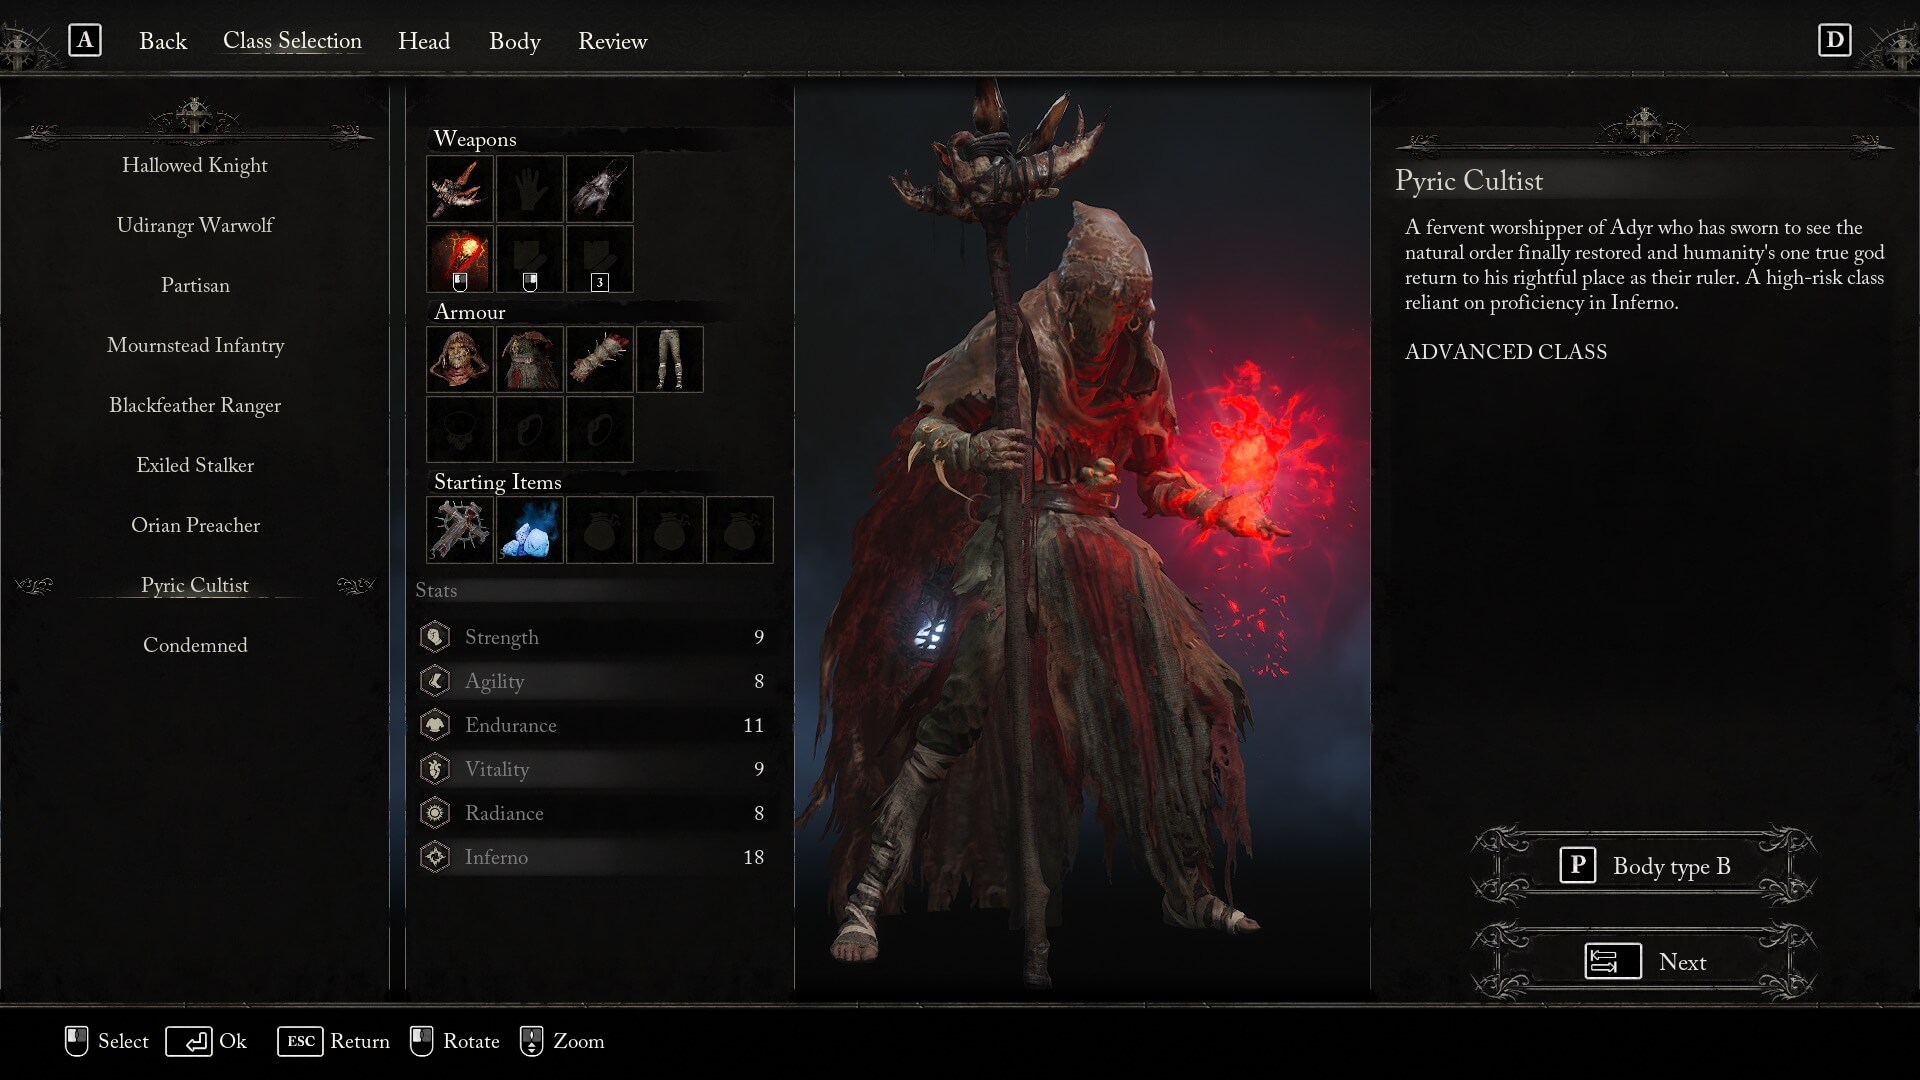 Lords of the Fallen Pyric Cultist Class